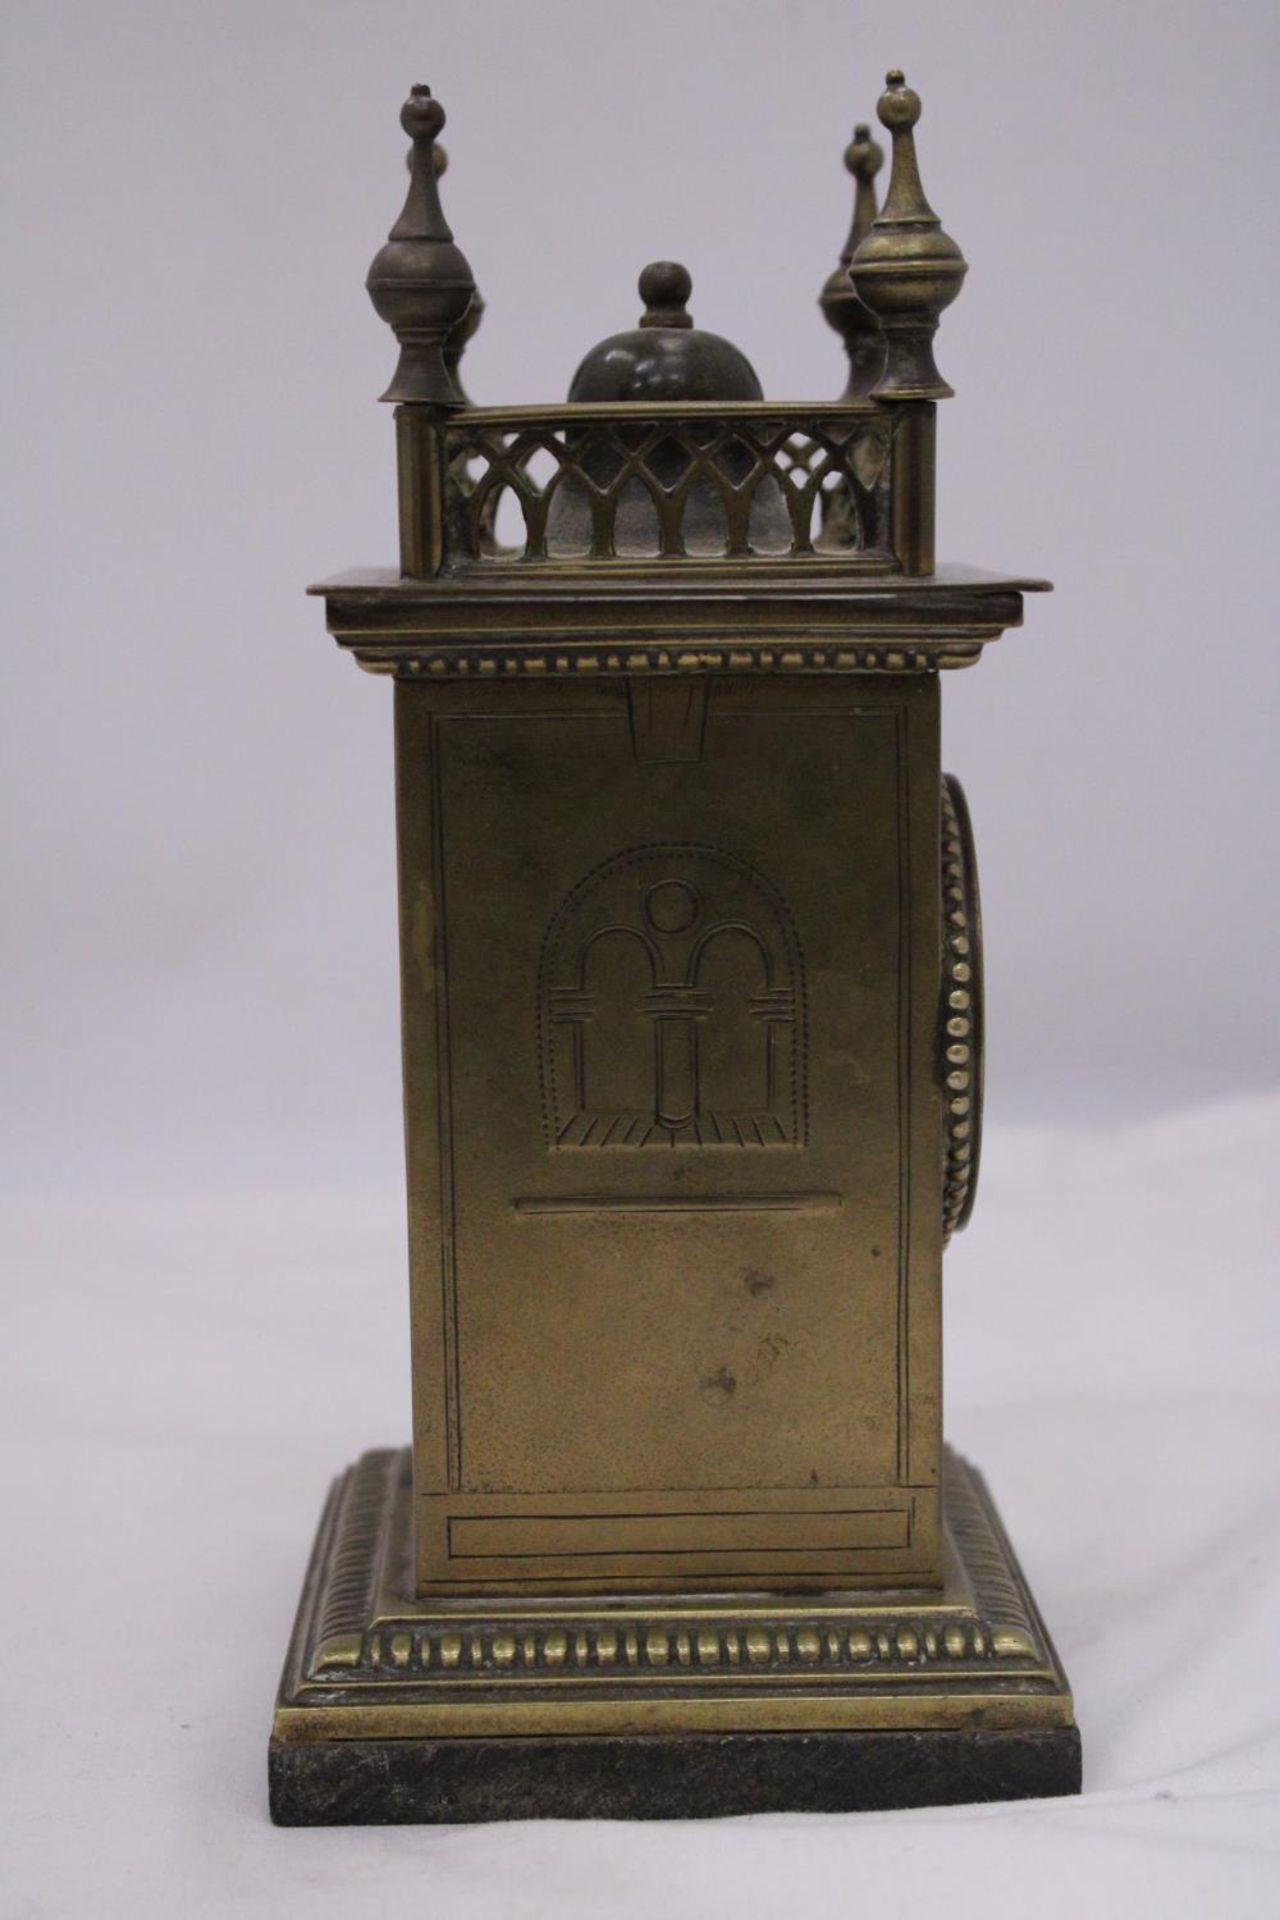 A VINTAGE BRASS MANTEL CLOCK ON A MARBLE BASE, WITH FOUR SPIRES TO THE TOP. WORKING WHEN - Image 5 of 5